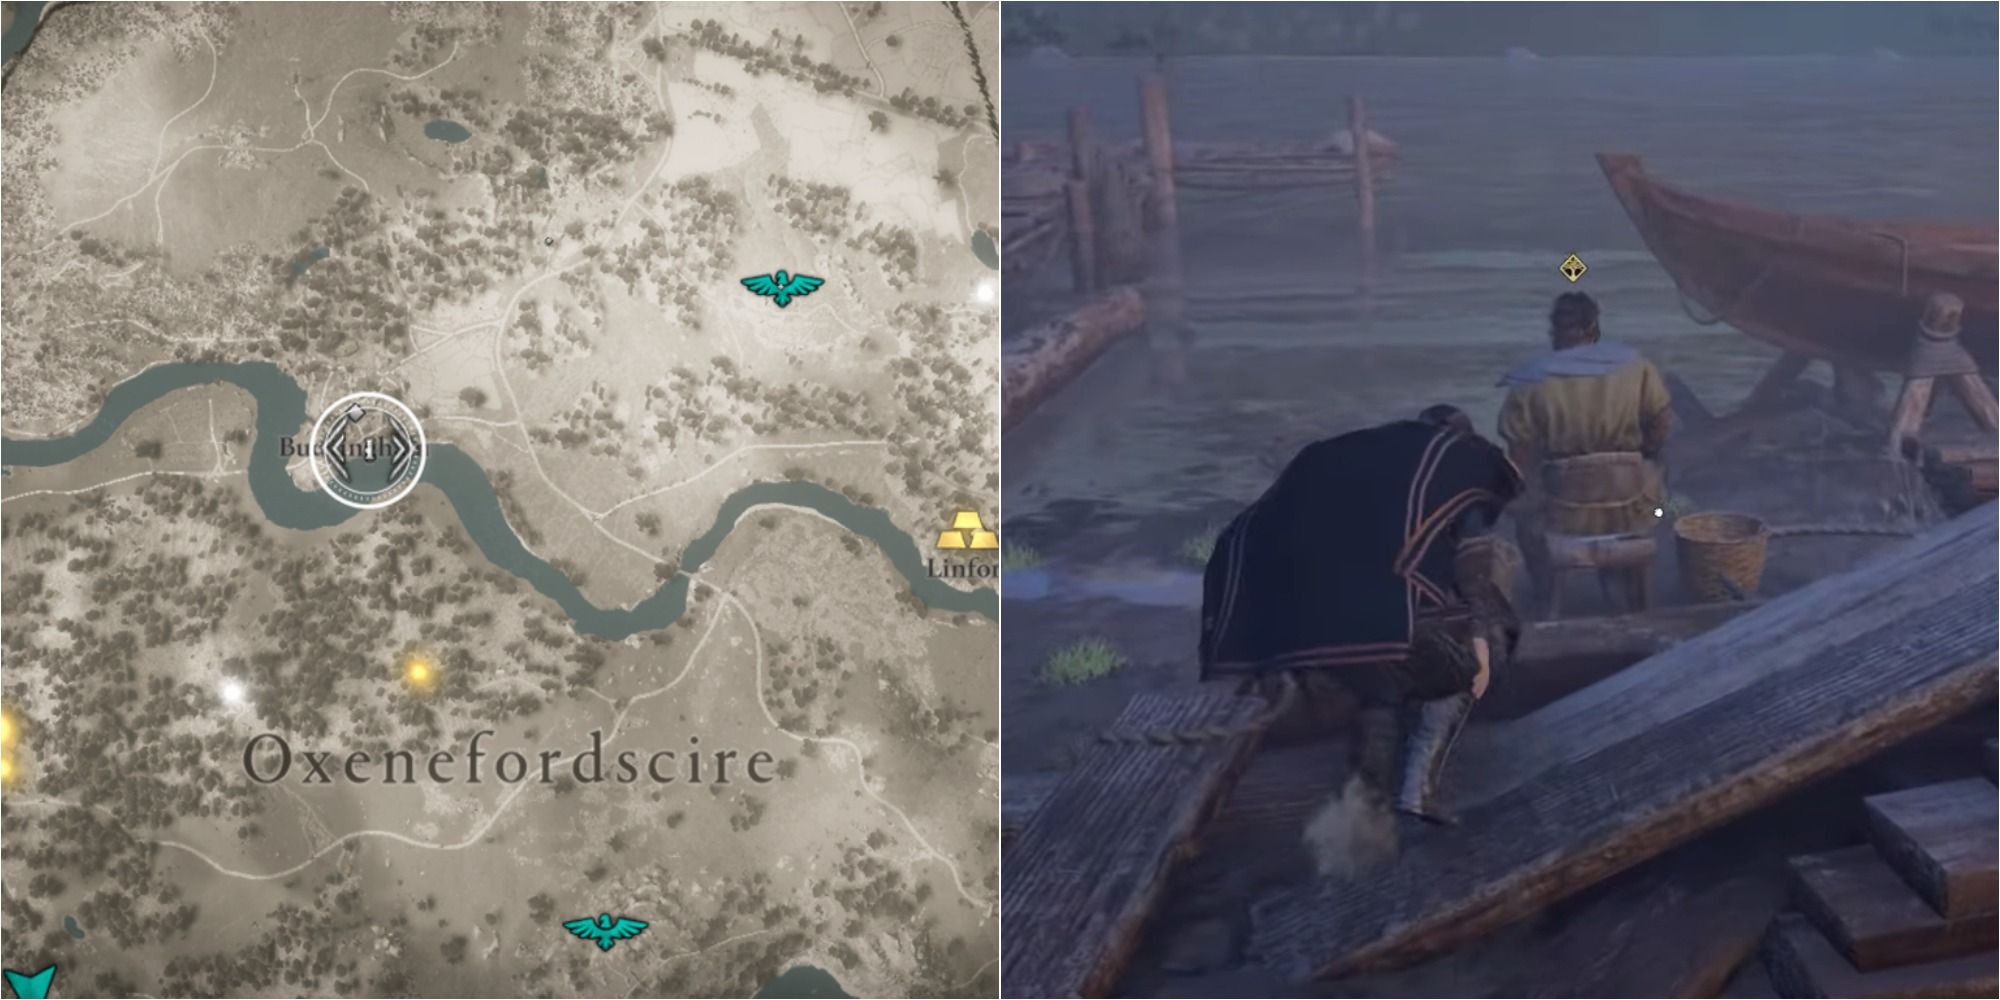 Assassin's Creed Valhalla Split Image Showing The Lathe Location